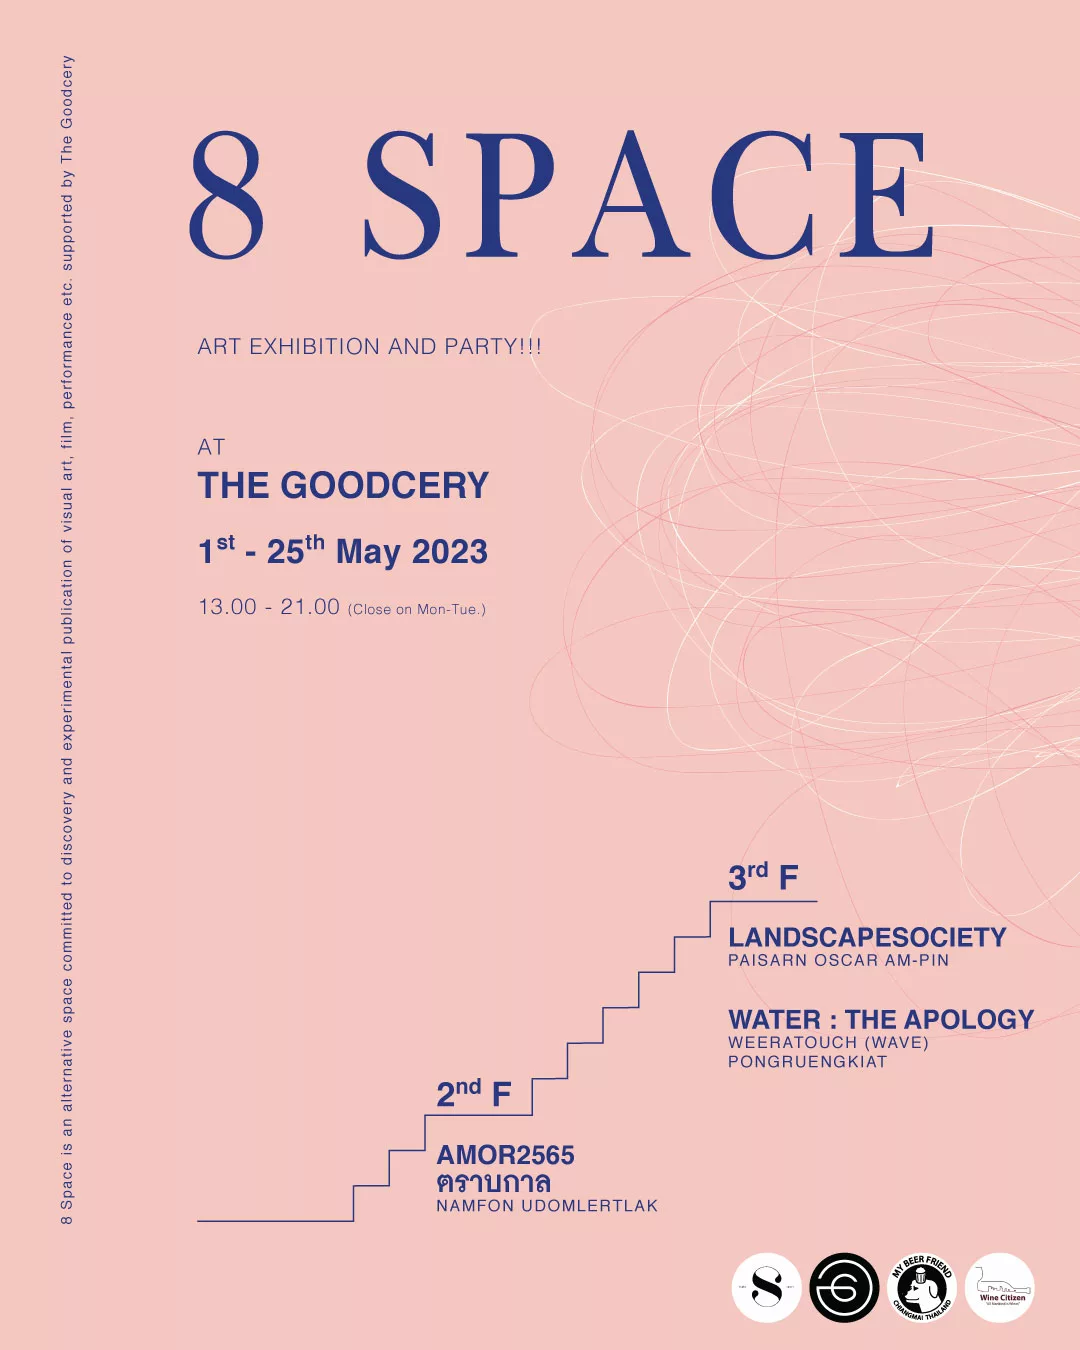 8 Space Art Exhibition and Opening Party on 1 - 25 May 2023